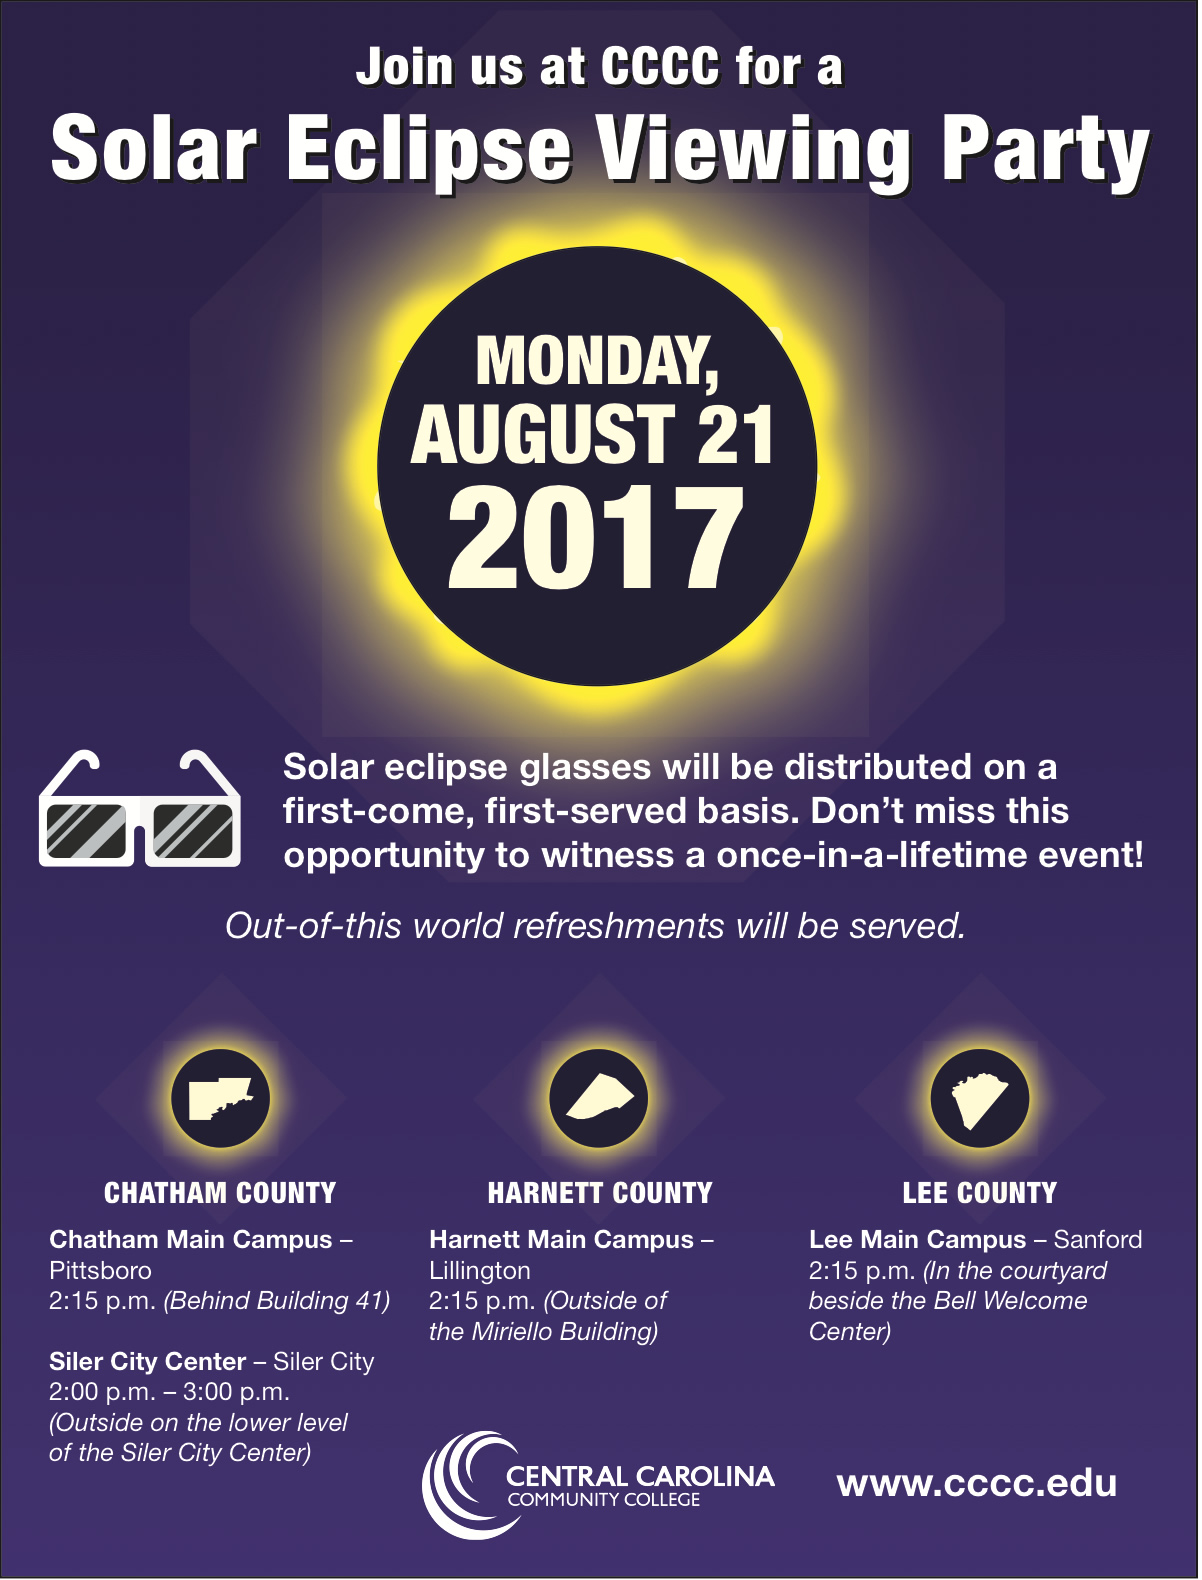 CCCC will host solar eclipse viewing parties